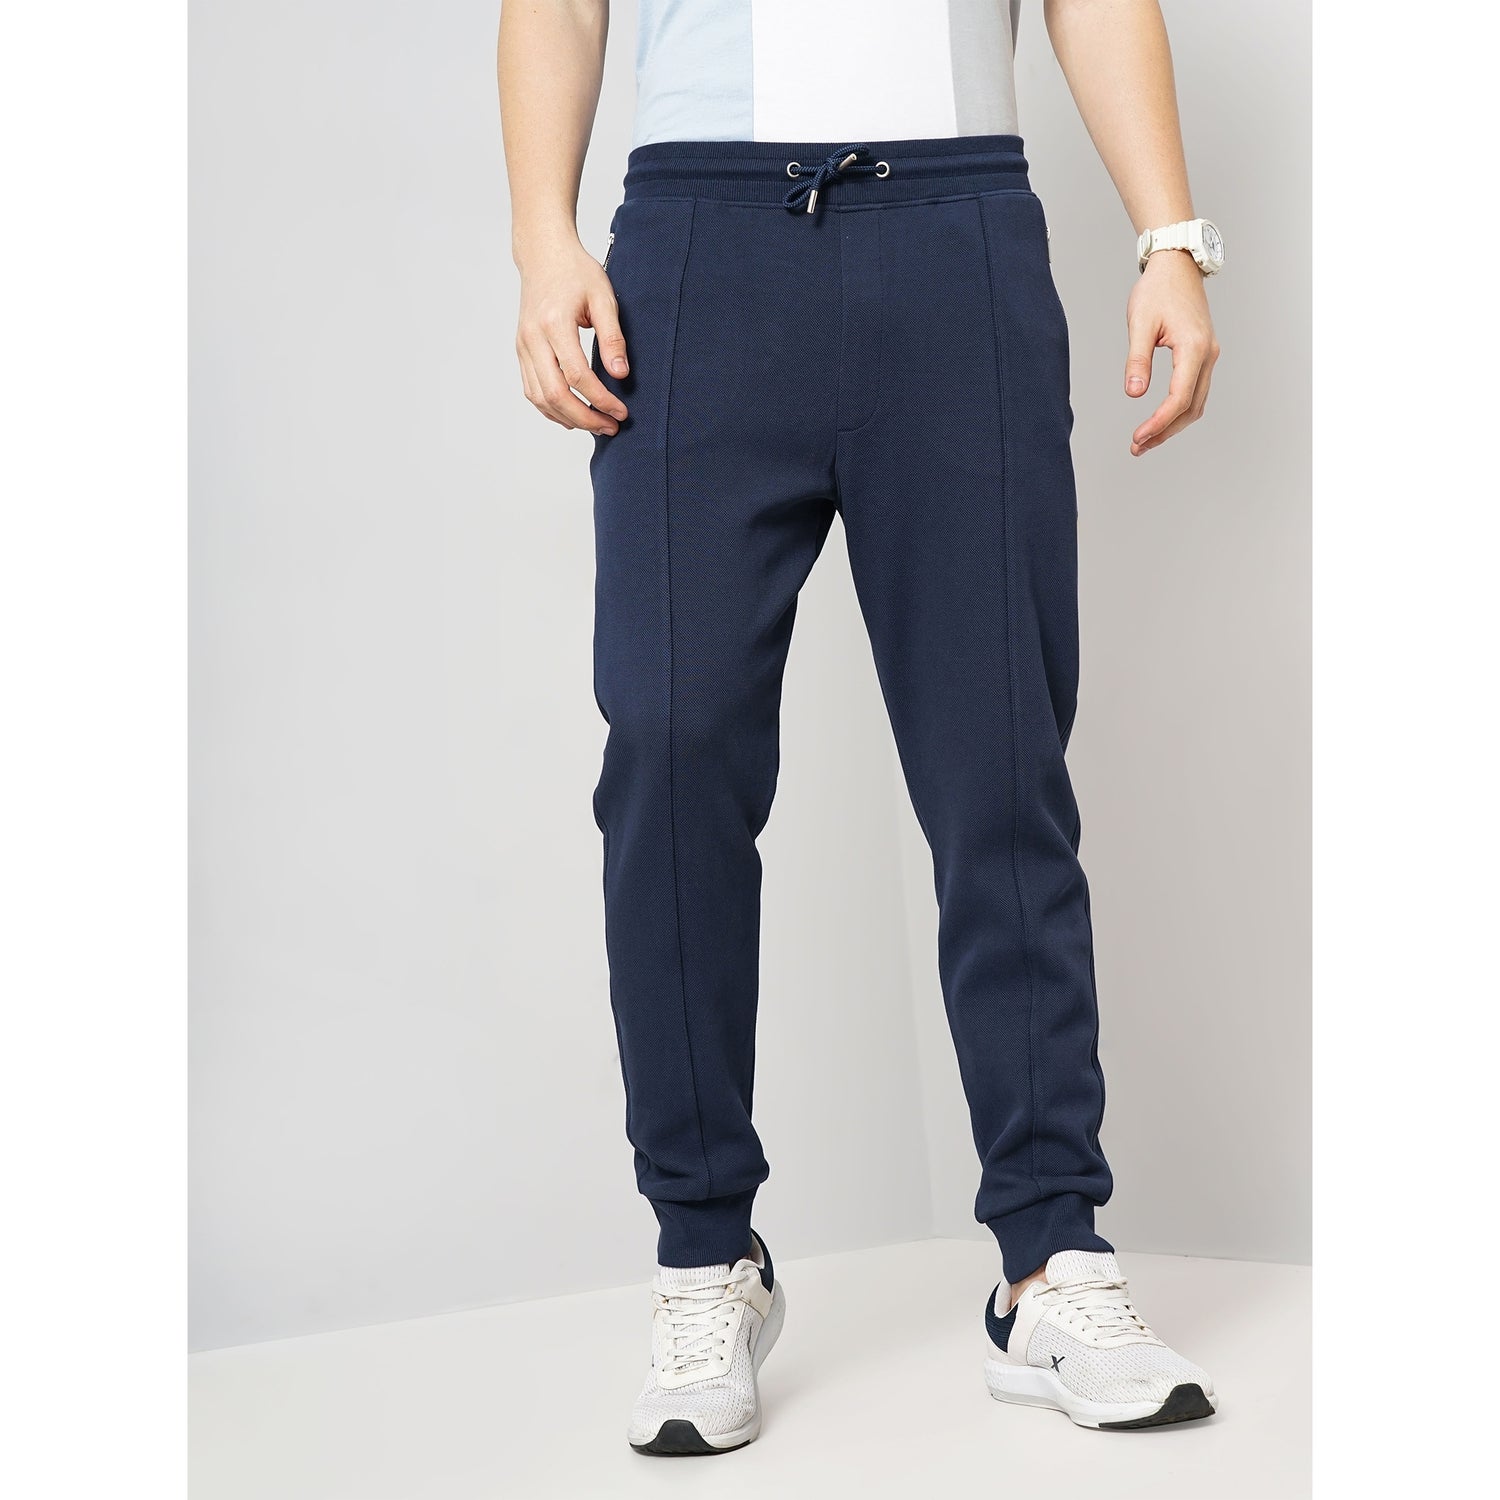 Men Navy Blue Solid Loose Fit Cotton Pique Knitted Jogger Casual Trousers (GOPIQUET)